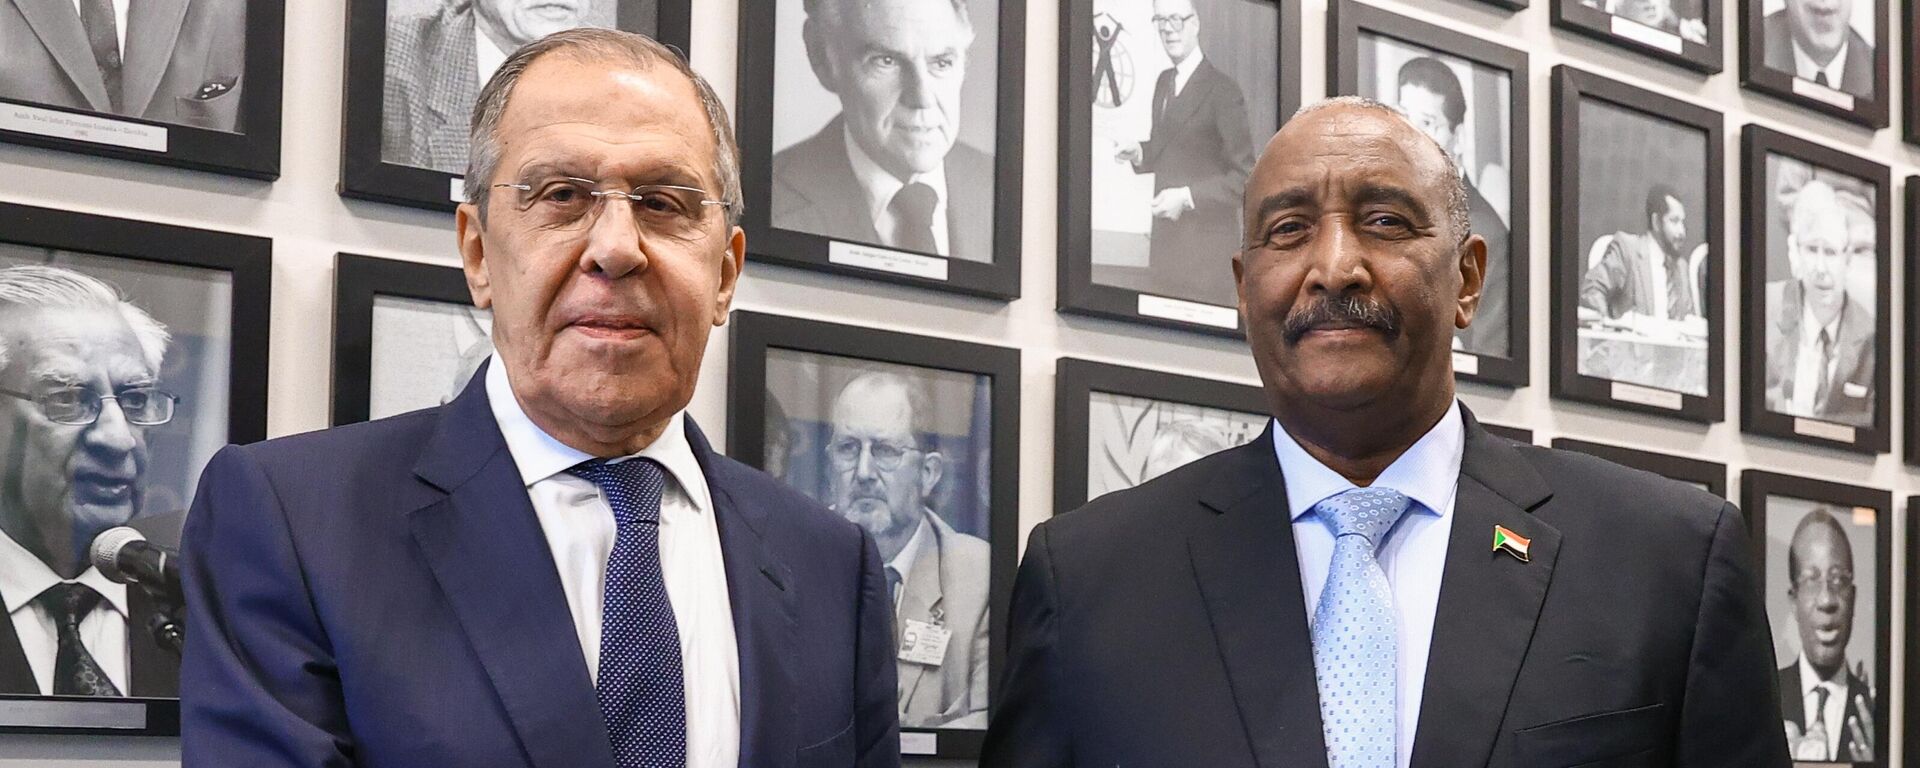 Russian Foreign Minister Sergey Lavrov (left) and Chairman of the Sovereign Council of the Republic of Sudan Abdelfattah Burhan at a meeting at the 77th session of the UN General Assembly in New York. - Sputnik International, 1920, 09.02.2023